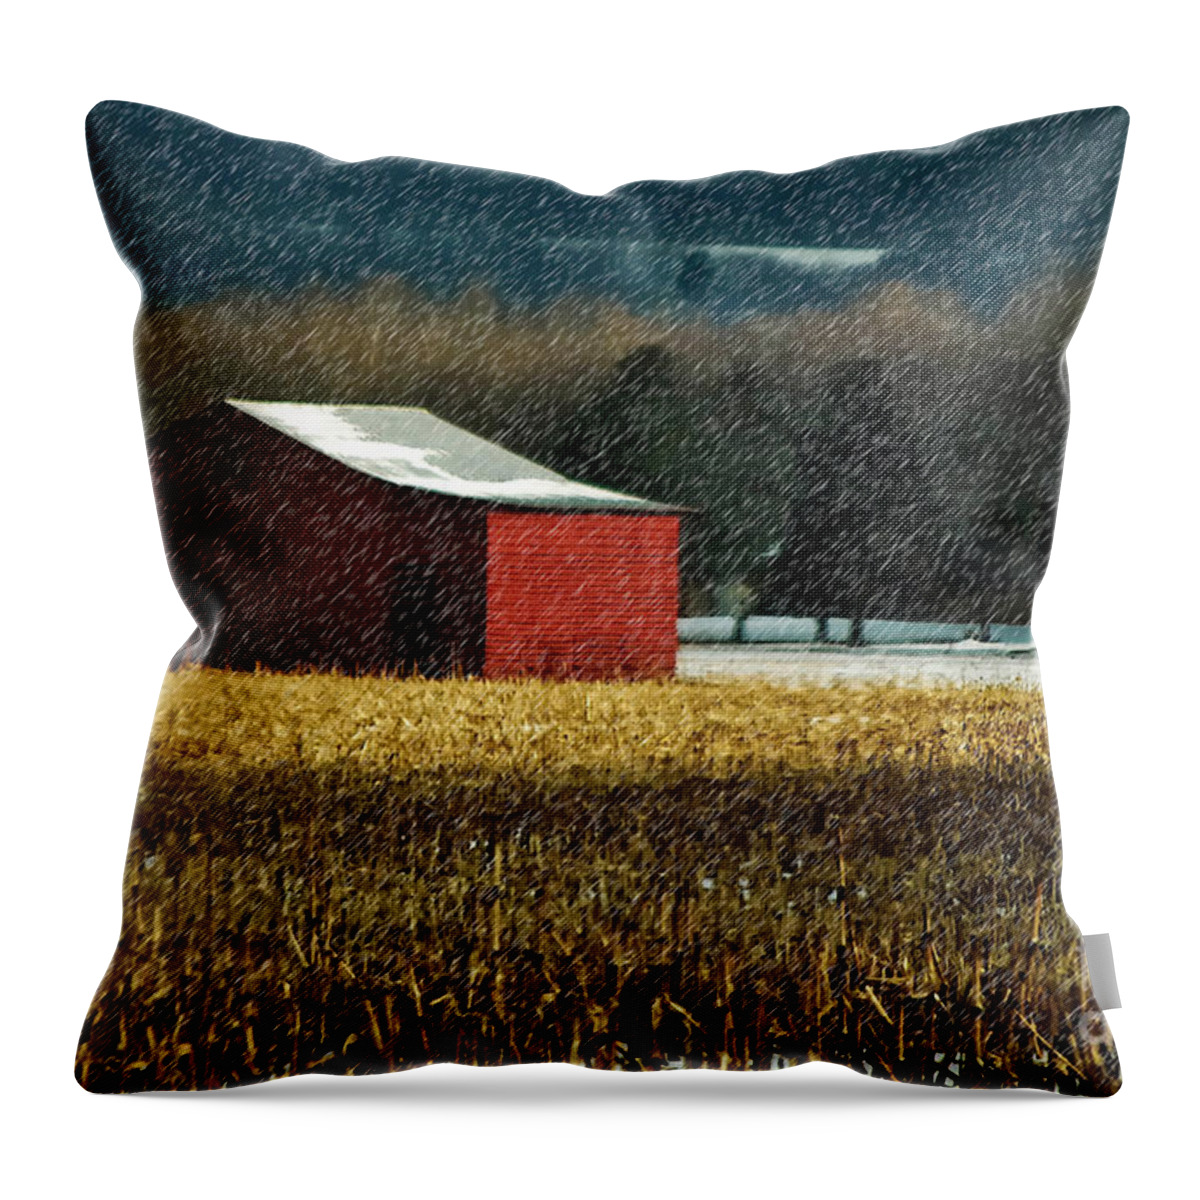 Barn Throw Pillow featuring the photograph Snowy Red Barn In Winter by Lois Bryan